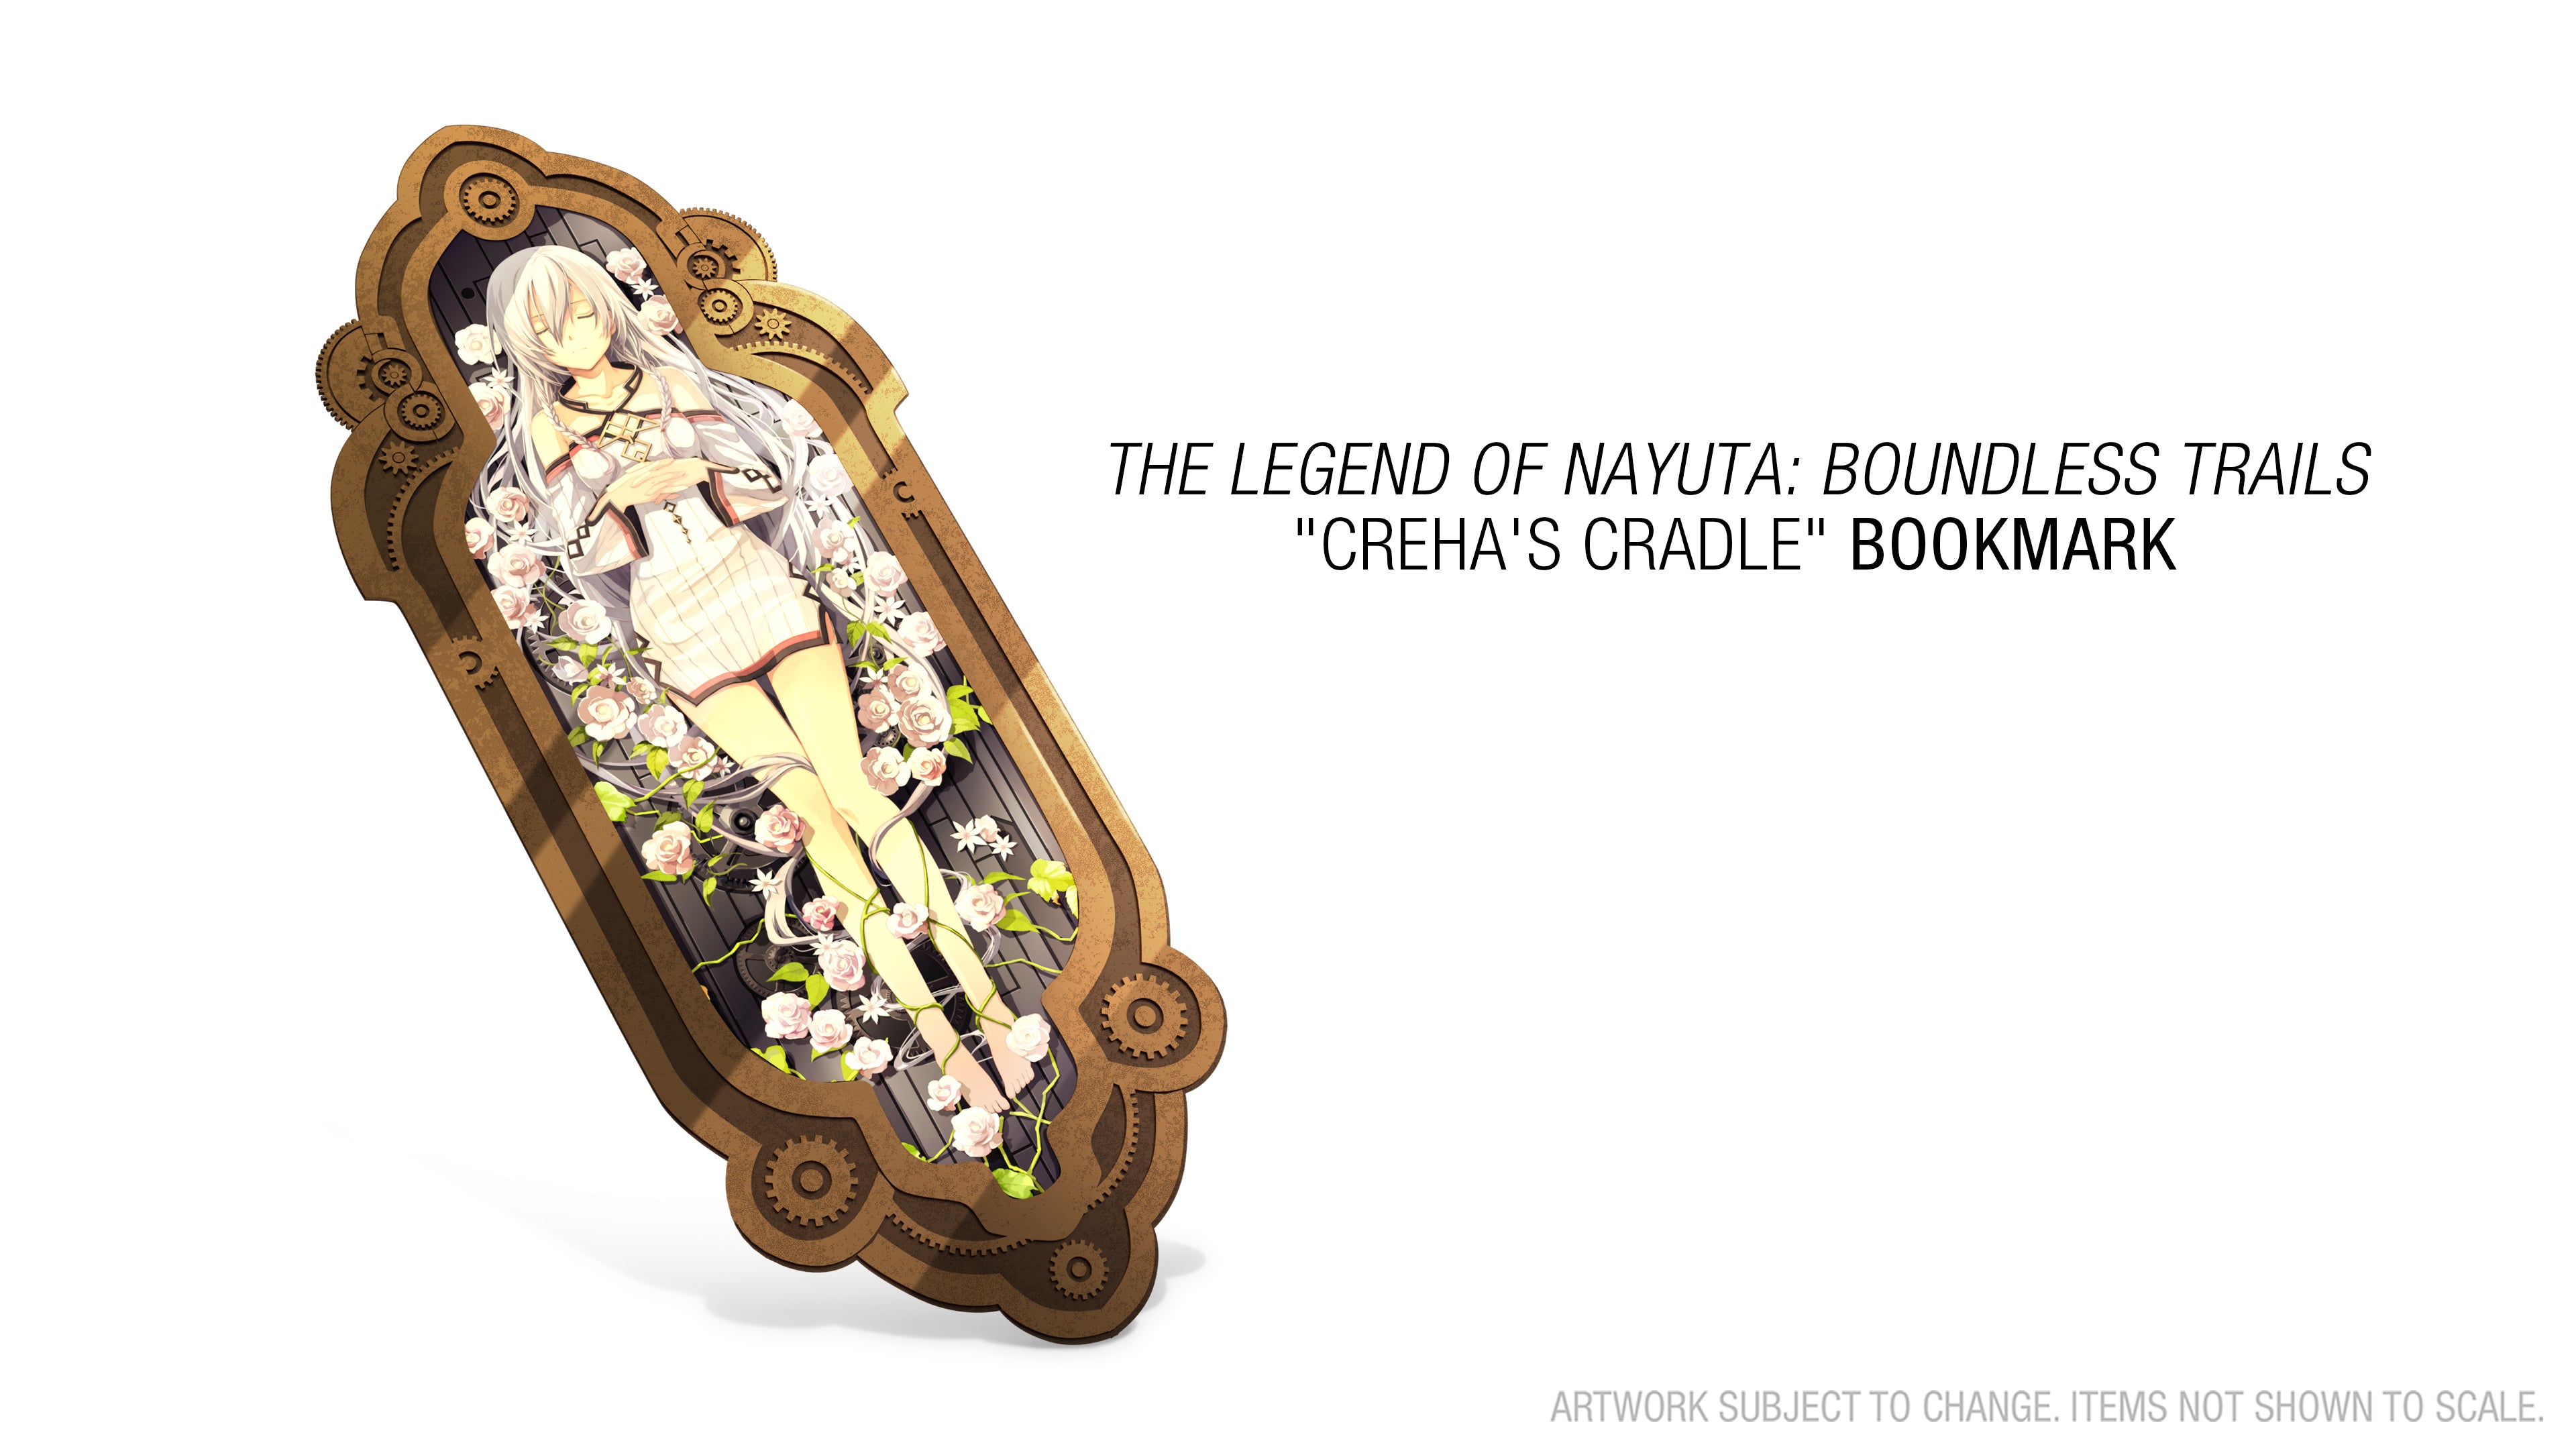 The Legend of Nayuta: Boundless Trails - Limited Edition - PS4®